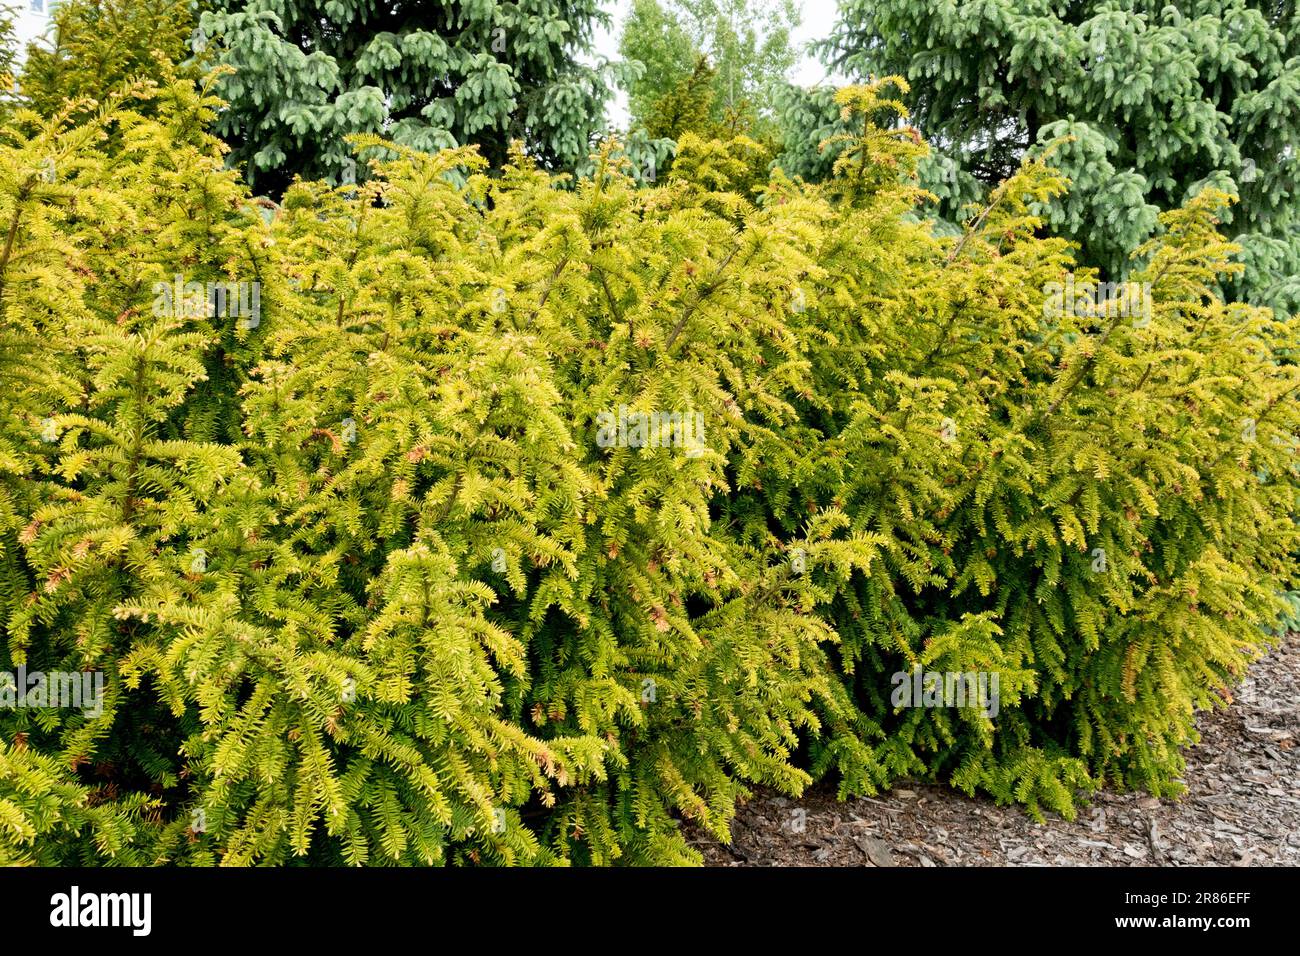 Taxus baccata Hedge English Yew Taxus hedge Shrubby Taxus baccata 'Dovastonii Aurea' European Yew Branches Common Yew Spring Bright Yellow Taxus Stock Photo